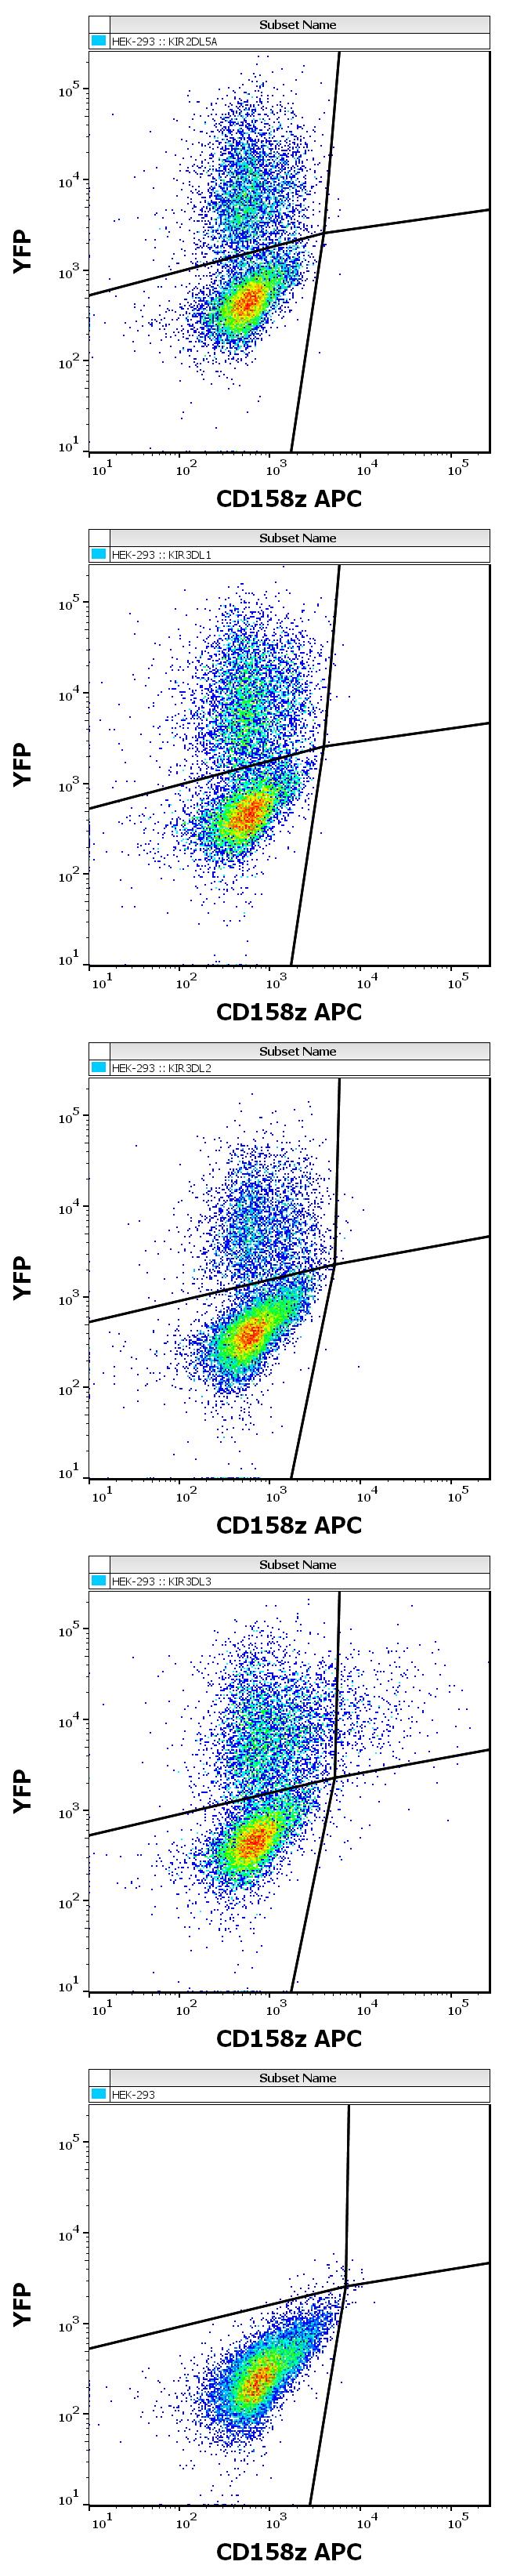 Fig 2: Flow cytometry surface staining patterns of non-transfected HEK-293 cells and HEK-293 cells transfected with KIR-family coding plasmids co-transfected with YFP coding plasmid using anti-human CD158z (CH21) APC antibody (concentration in sample 10 μg/ml).